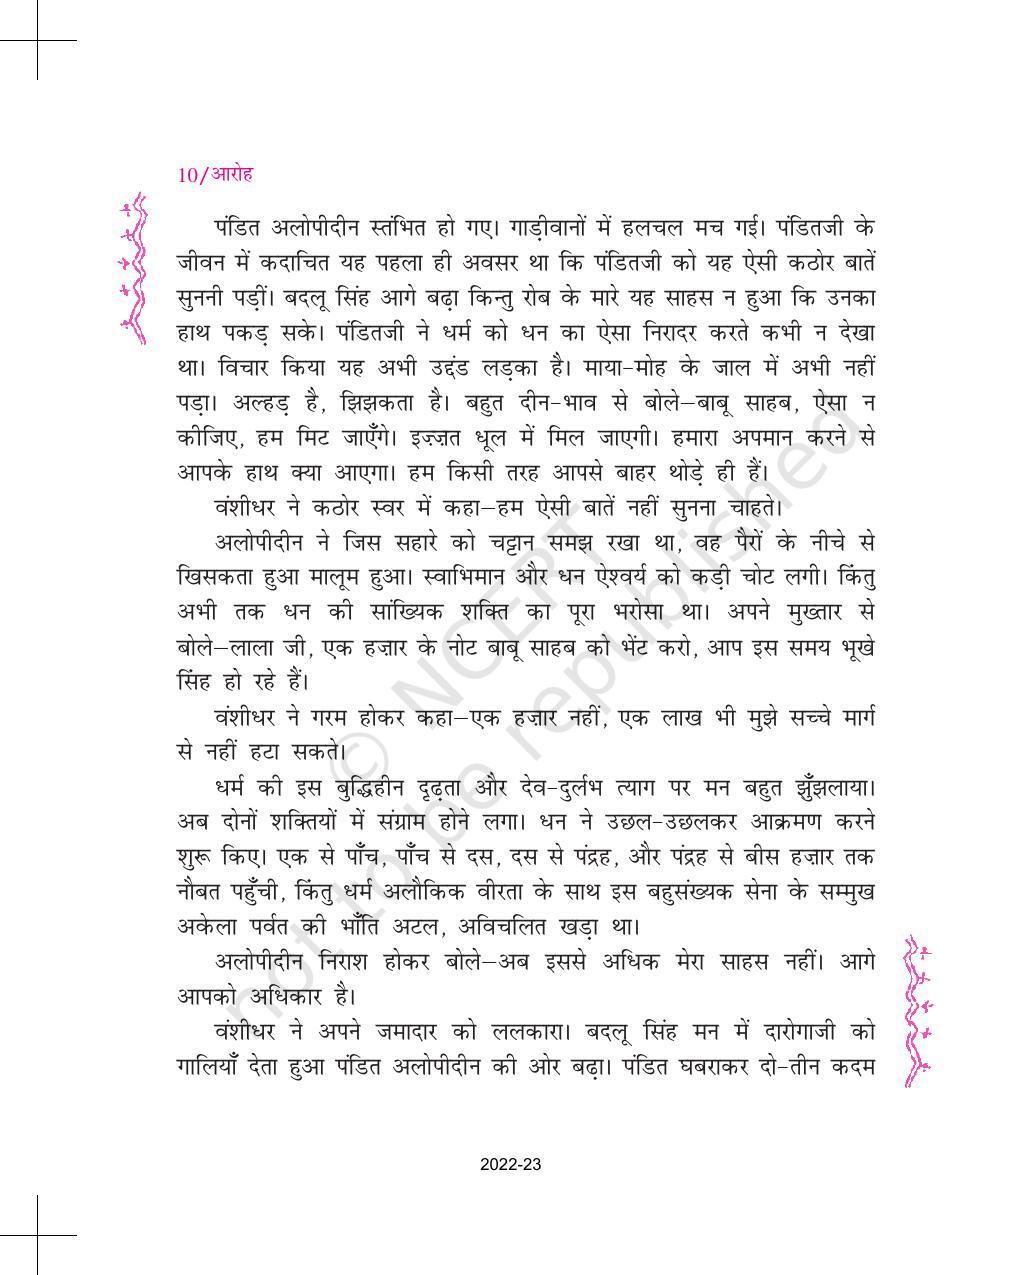 NCERT Book for Class 11 Hindi Aroh Chapter 1 नमक का दारोगा - Page 10